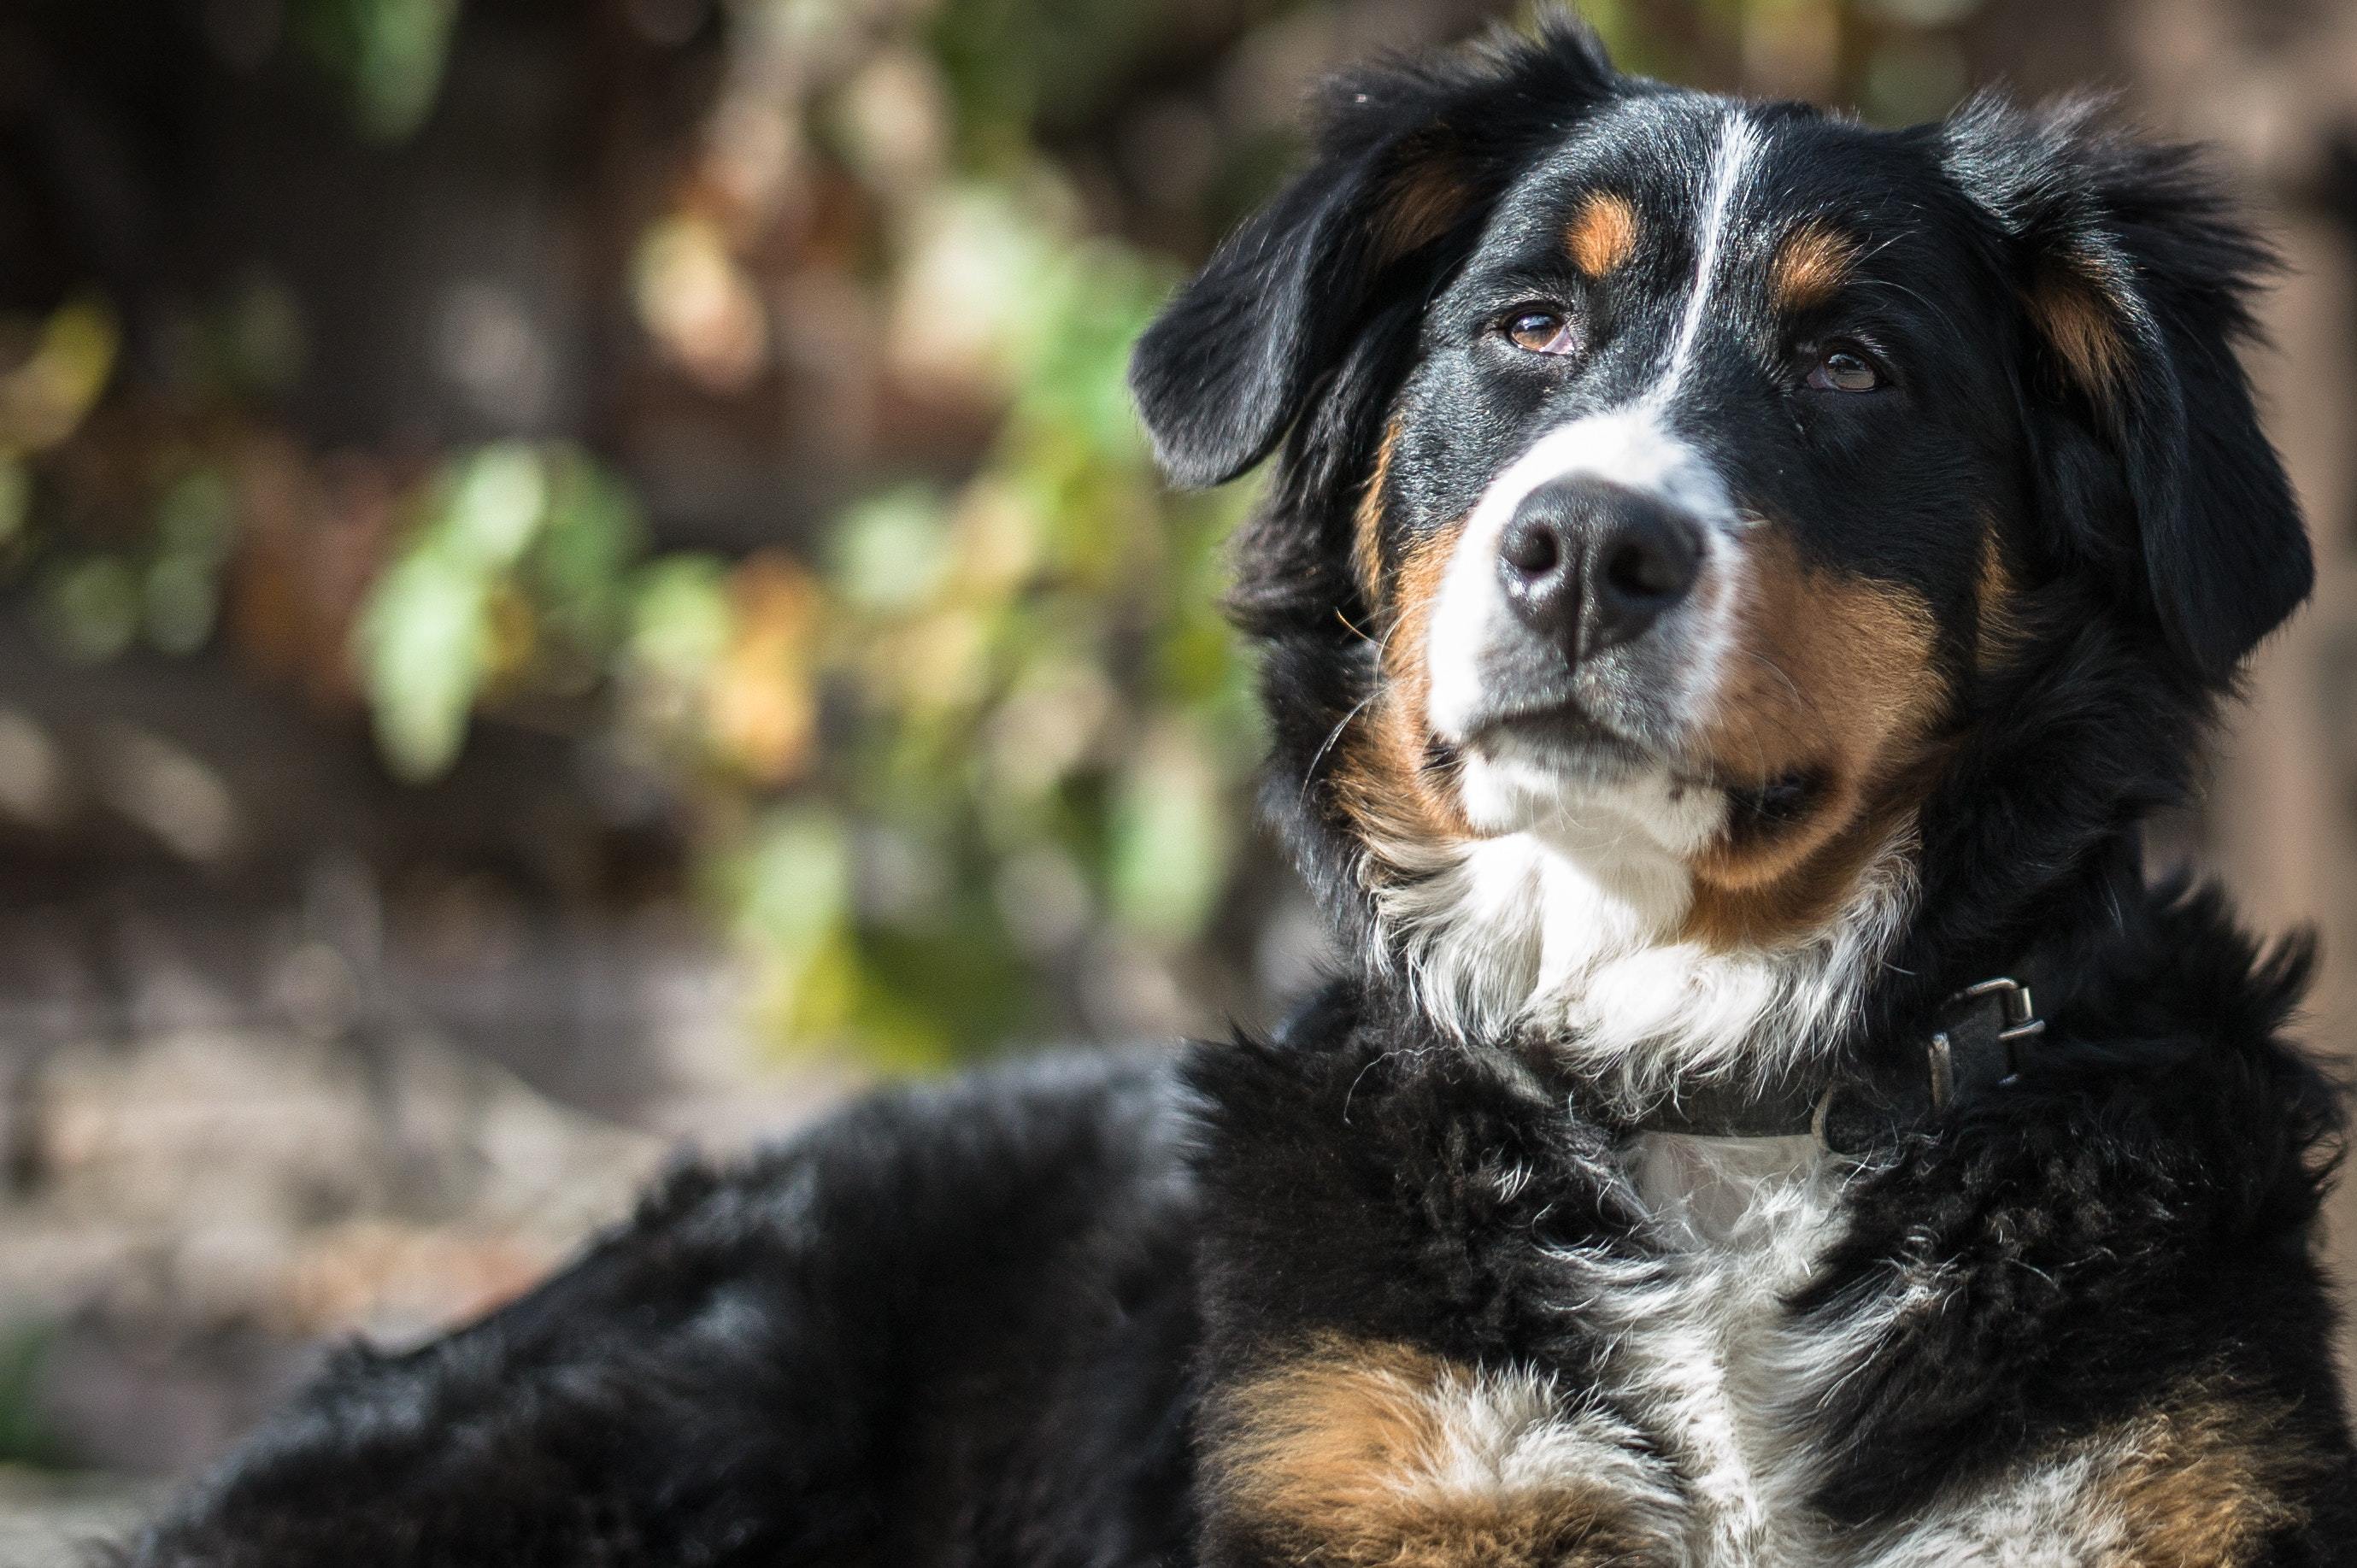 8 Heartbreaking Signs That Your Dog Is Getting Old